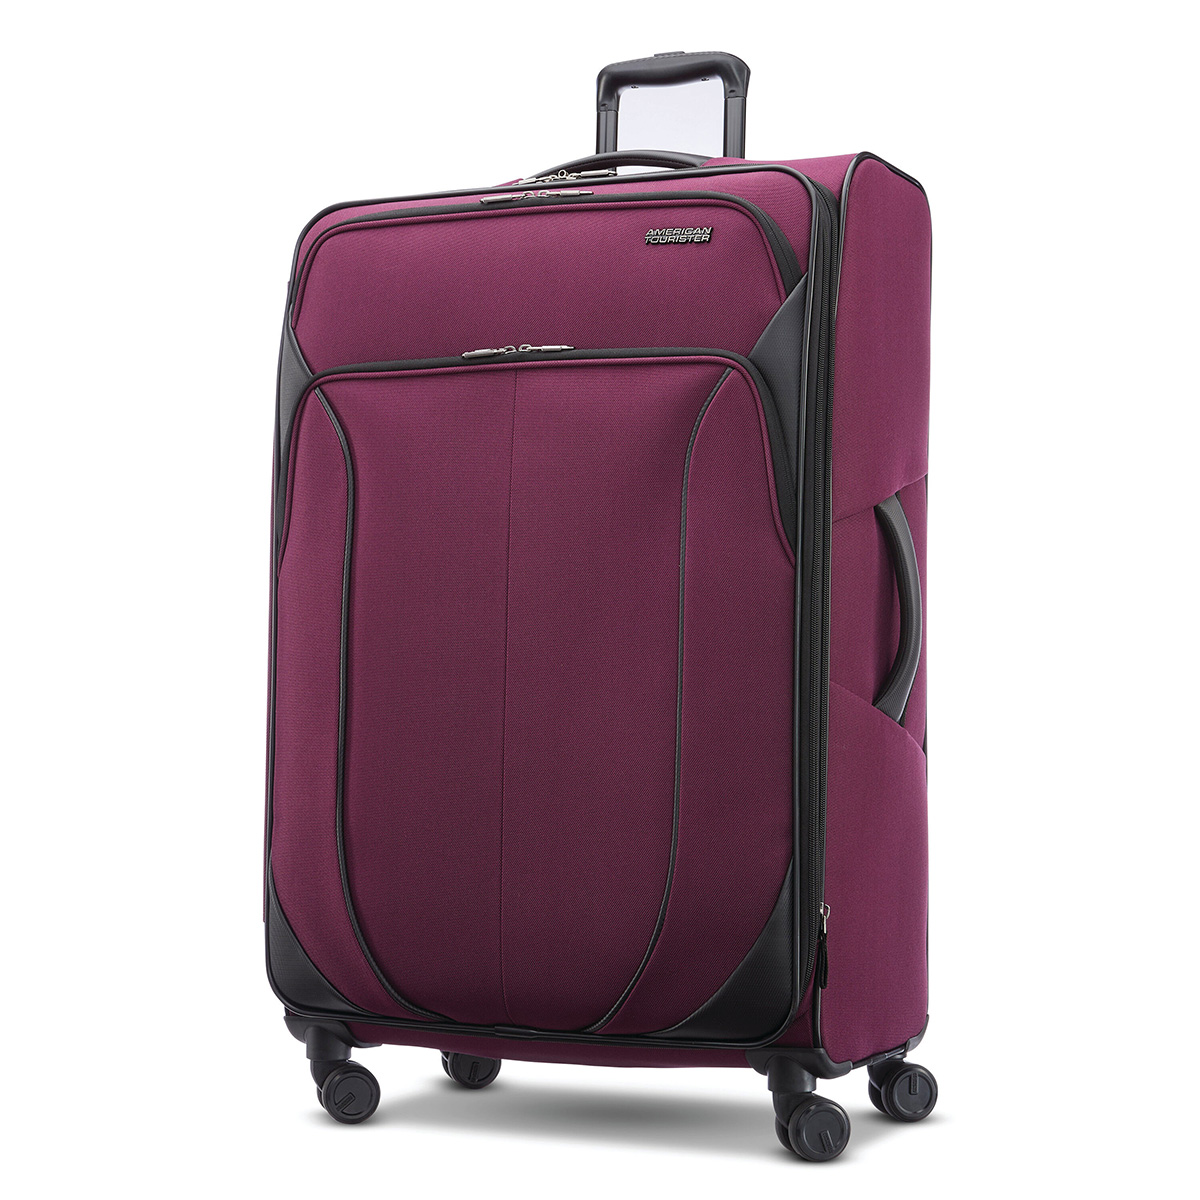 American Tourister(R) 4 Kix 28in. Upright Spinner Luggage